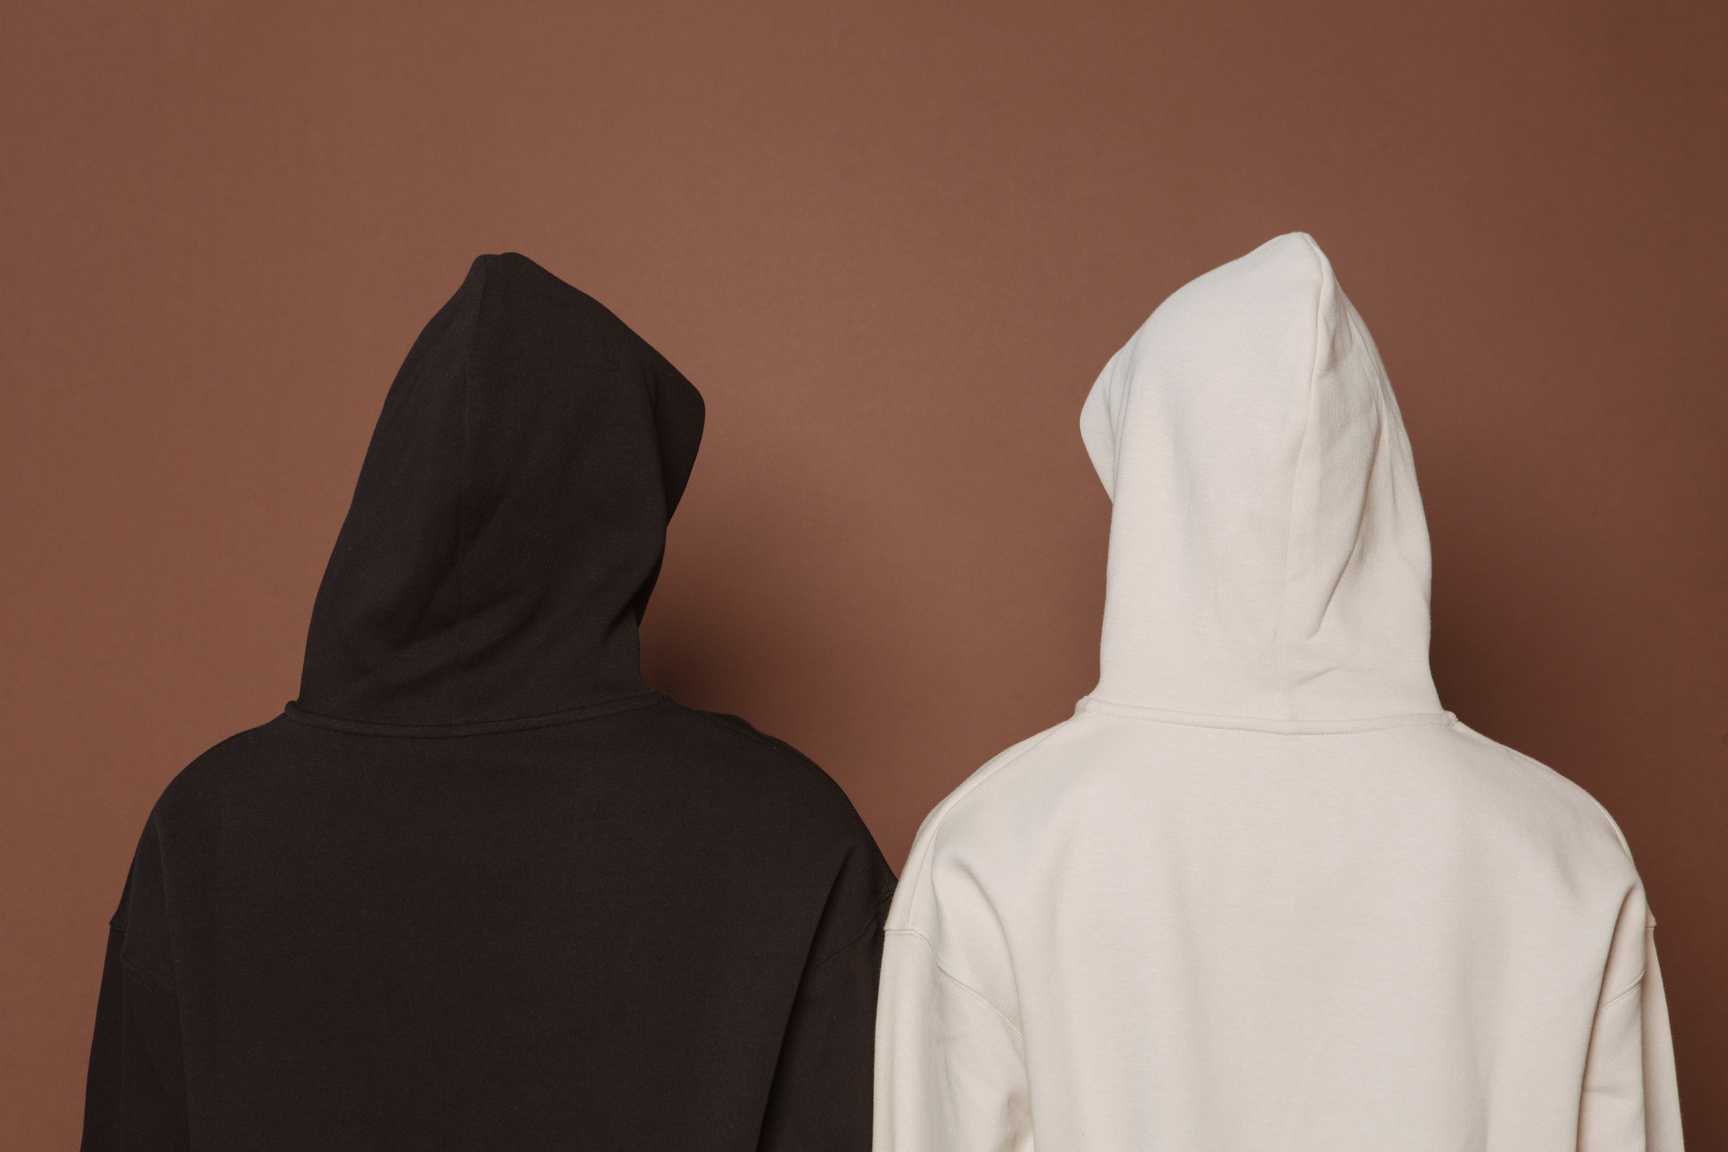 Models and black and white hoodies in studio